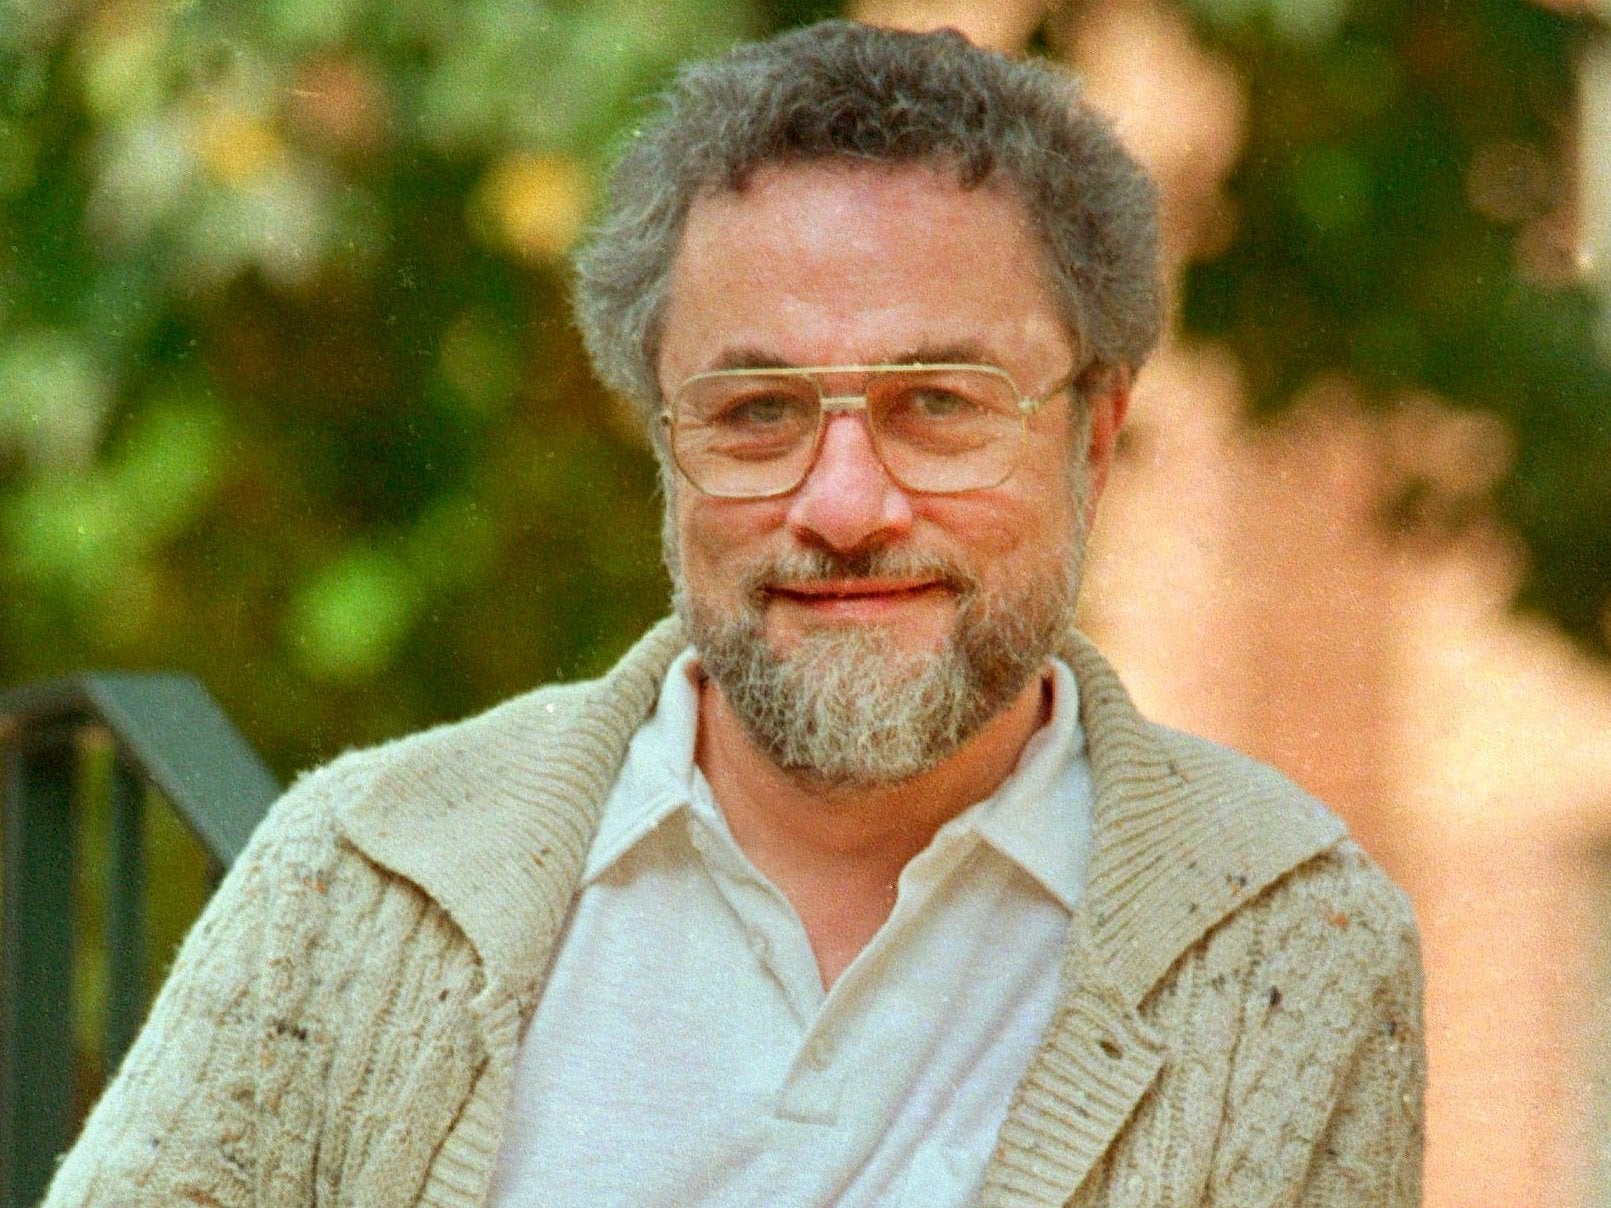 Cronauer in 1987. The movie took liberties with his real-life experiences, but the resemblance was close enough that it brought him some celebrity